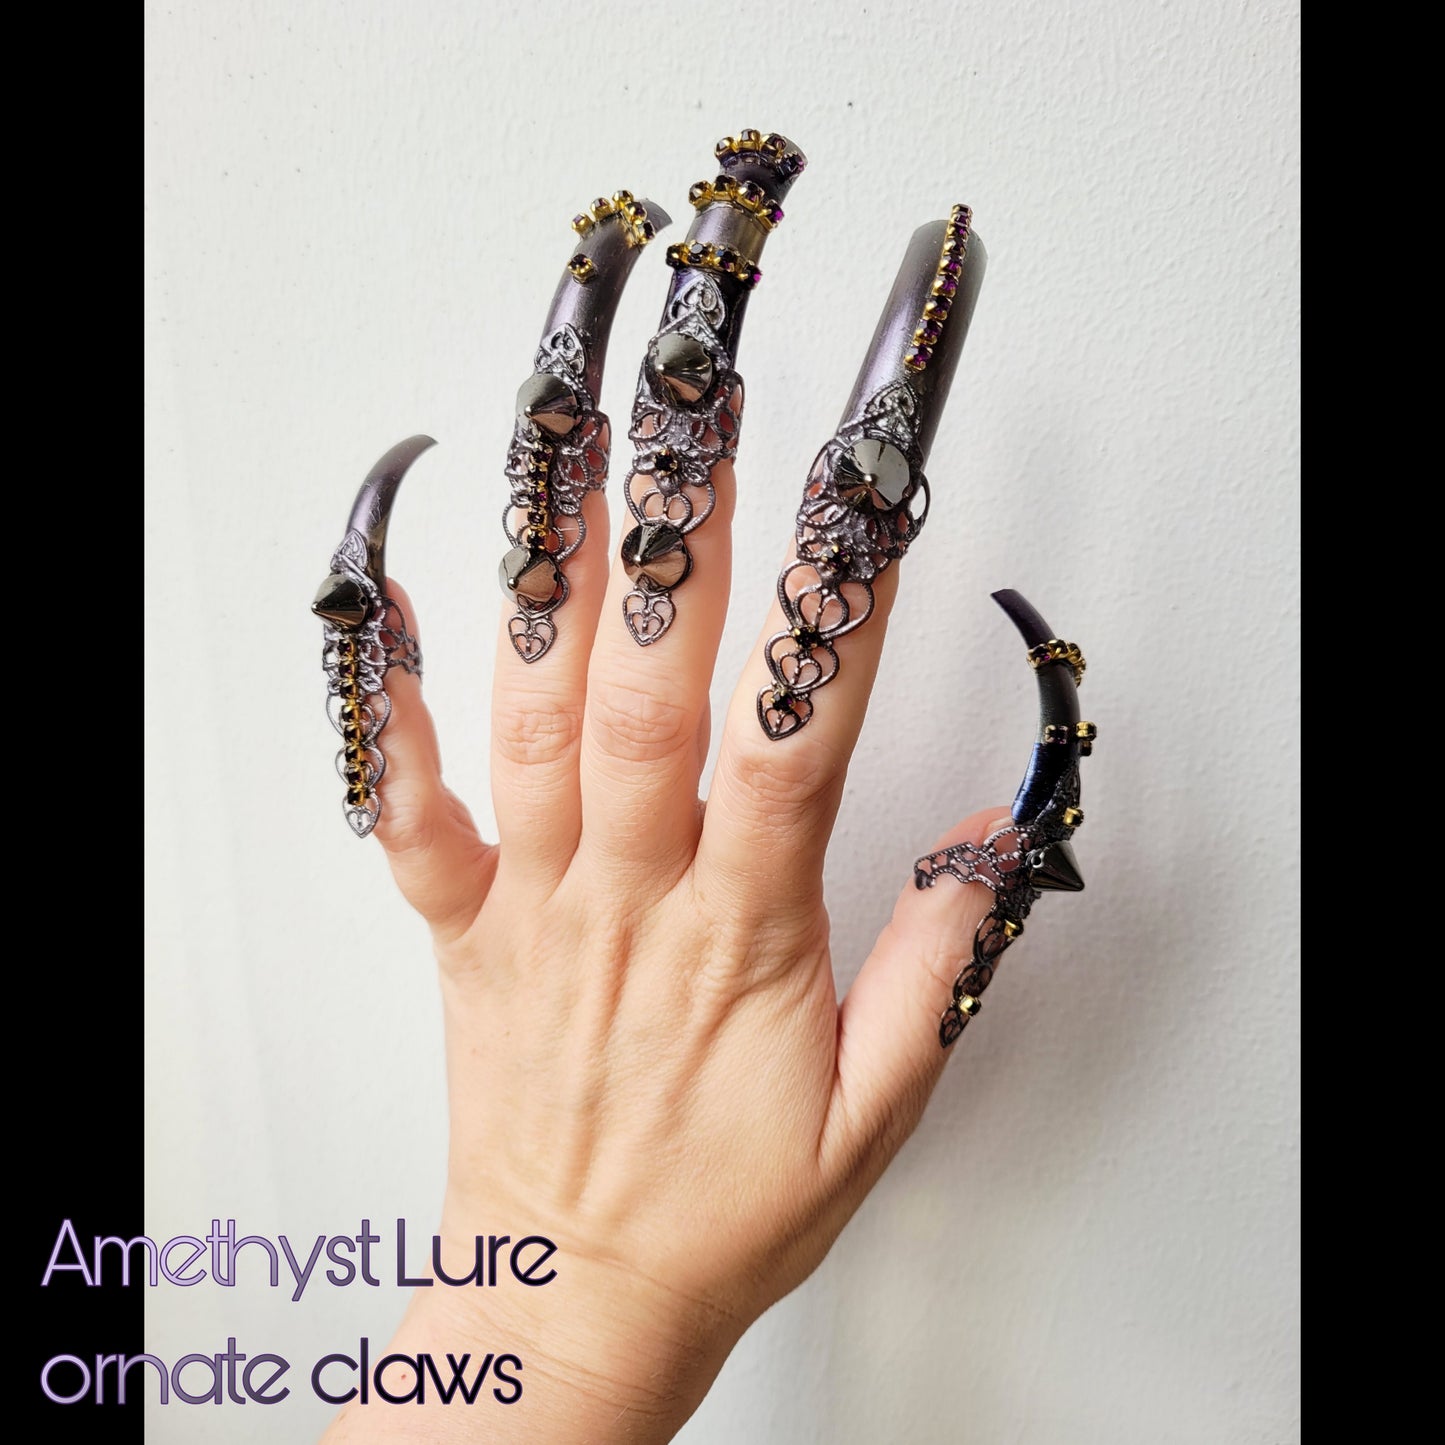 Made-to-order: the Amethyst Lure ornate claws